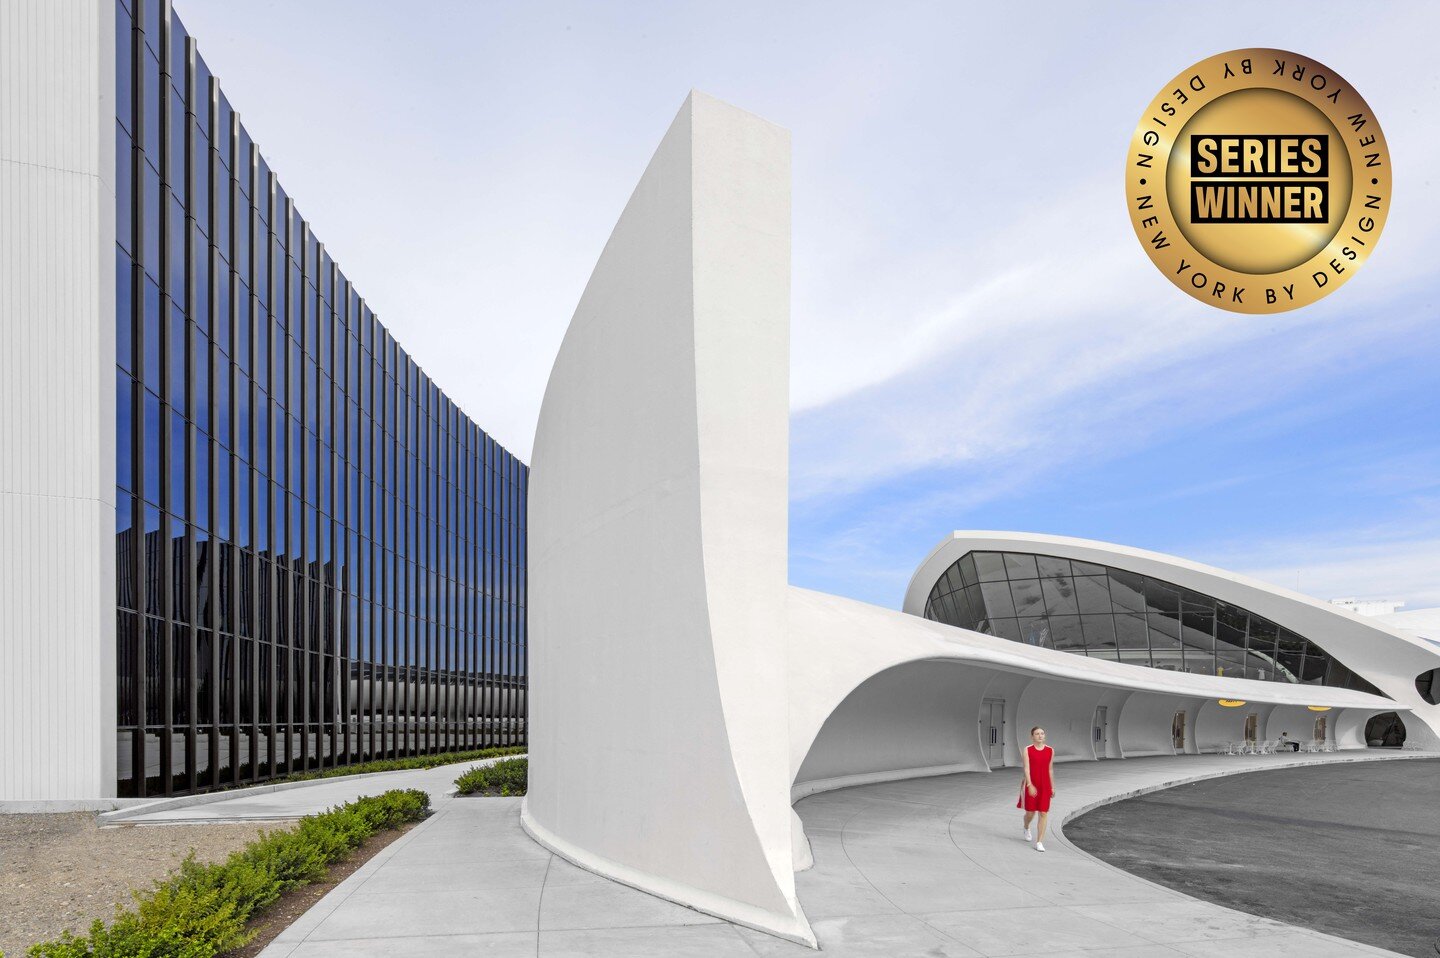 Thank you @bydesigntv! We are thrilled to be awarded the Season One, Series Winner by New York ByDesign: Architecture, for the TWA Hotel! 
 
Watch our feature during the latest episode on americabydesigntv.com where you can also cast your vote for th